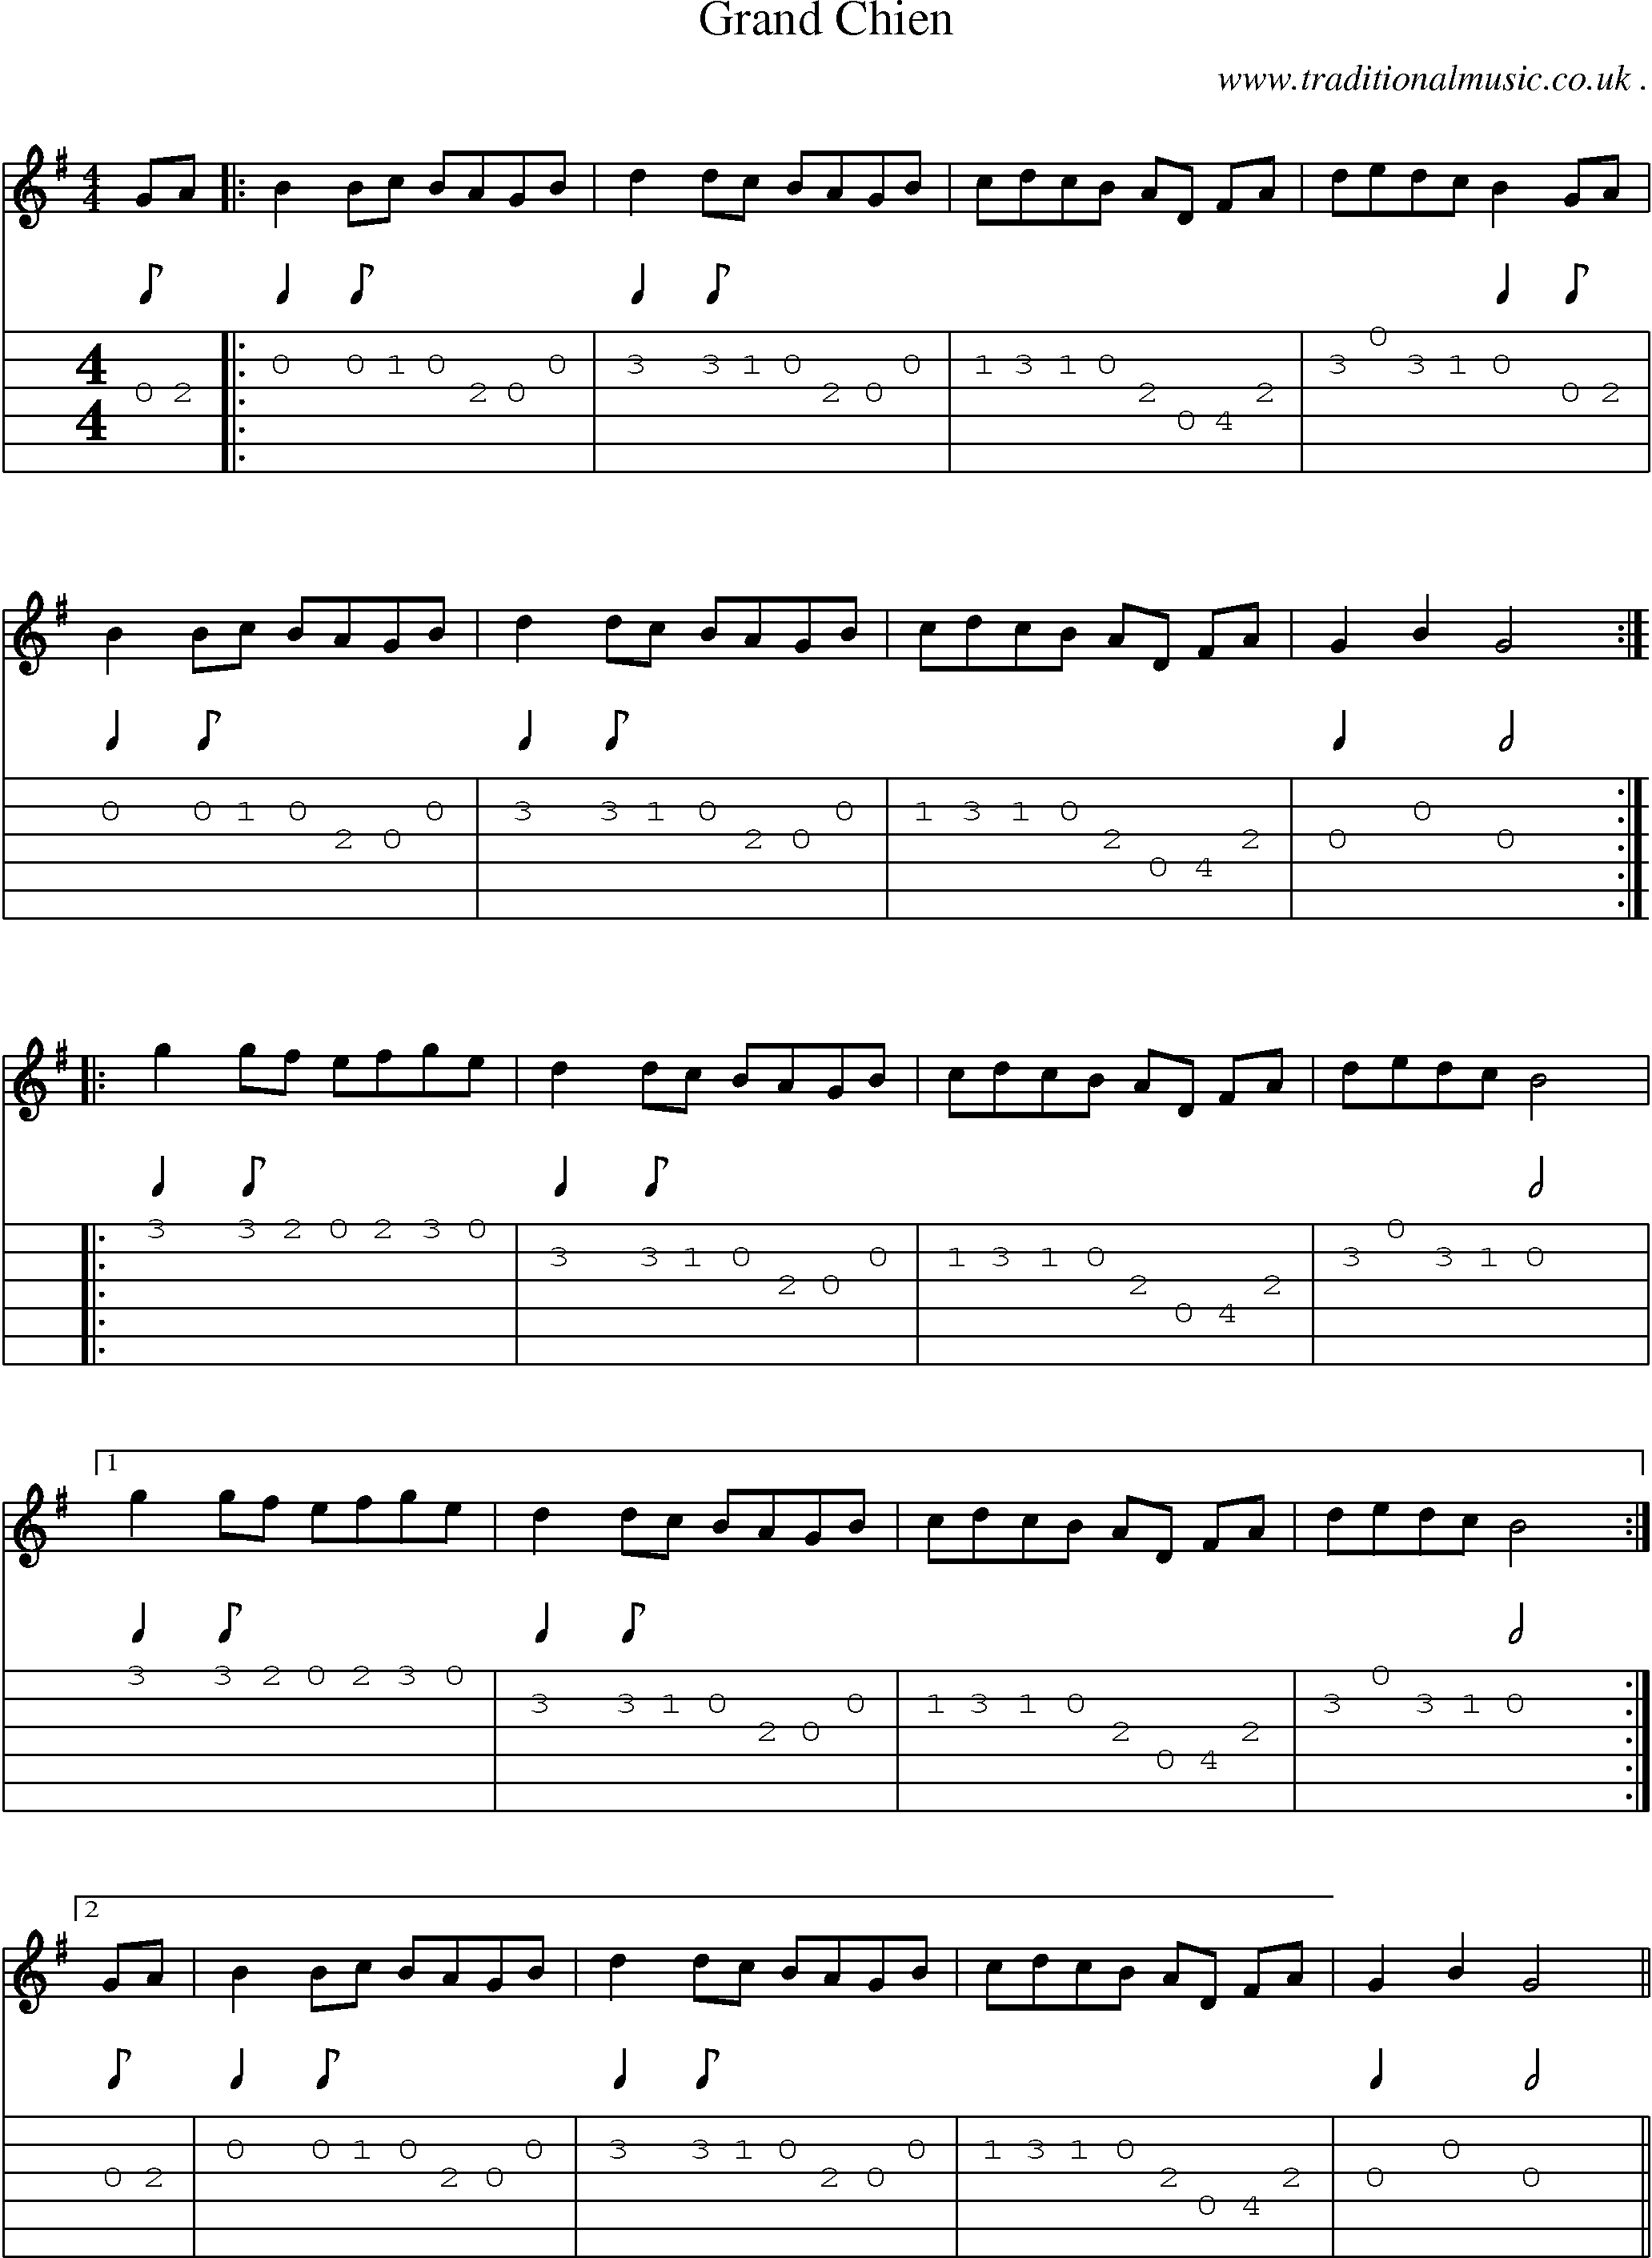 Sheet-Music and Guitar Tabs for Grand Chien